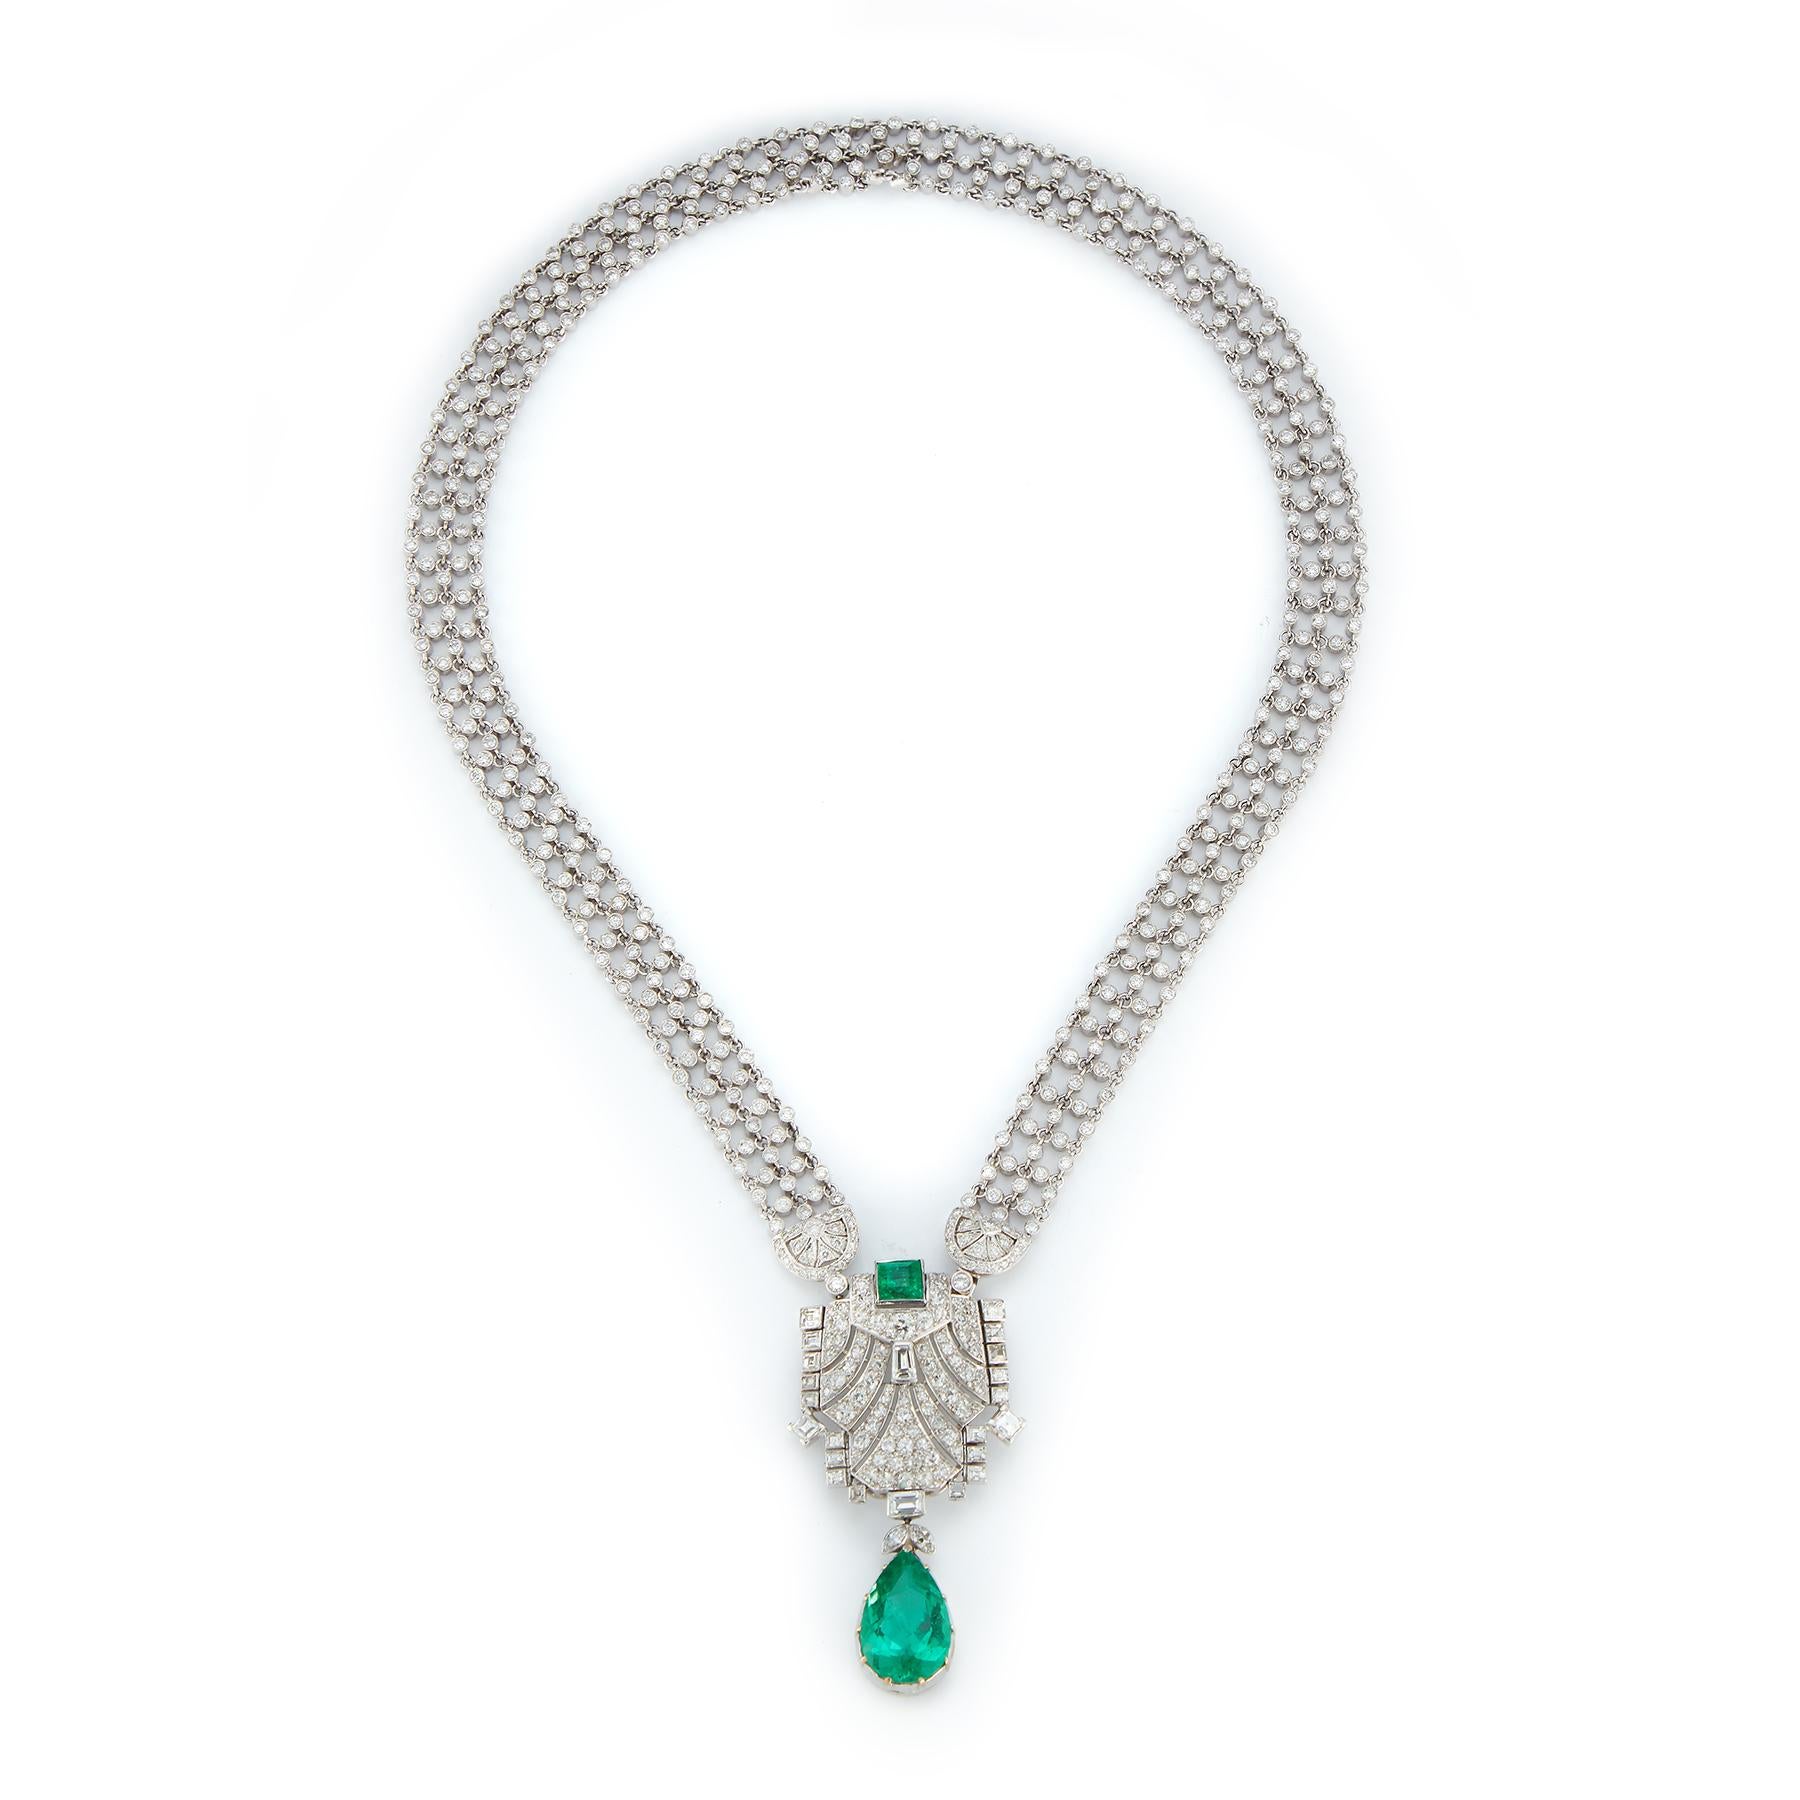 Emerald And Diamond Pear Shape Drop Necklace
AGL Certified ,Pear Cut Emerald, Emerald Weight: 6.72 Cts
18K White Gold
Necklace Length: 16